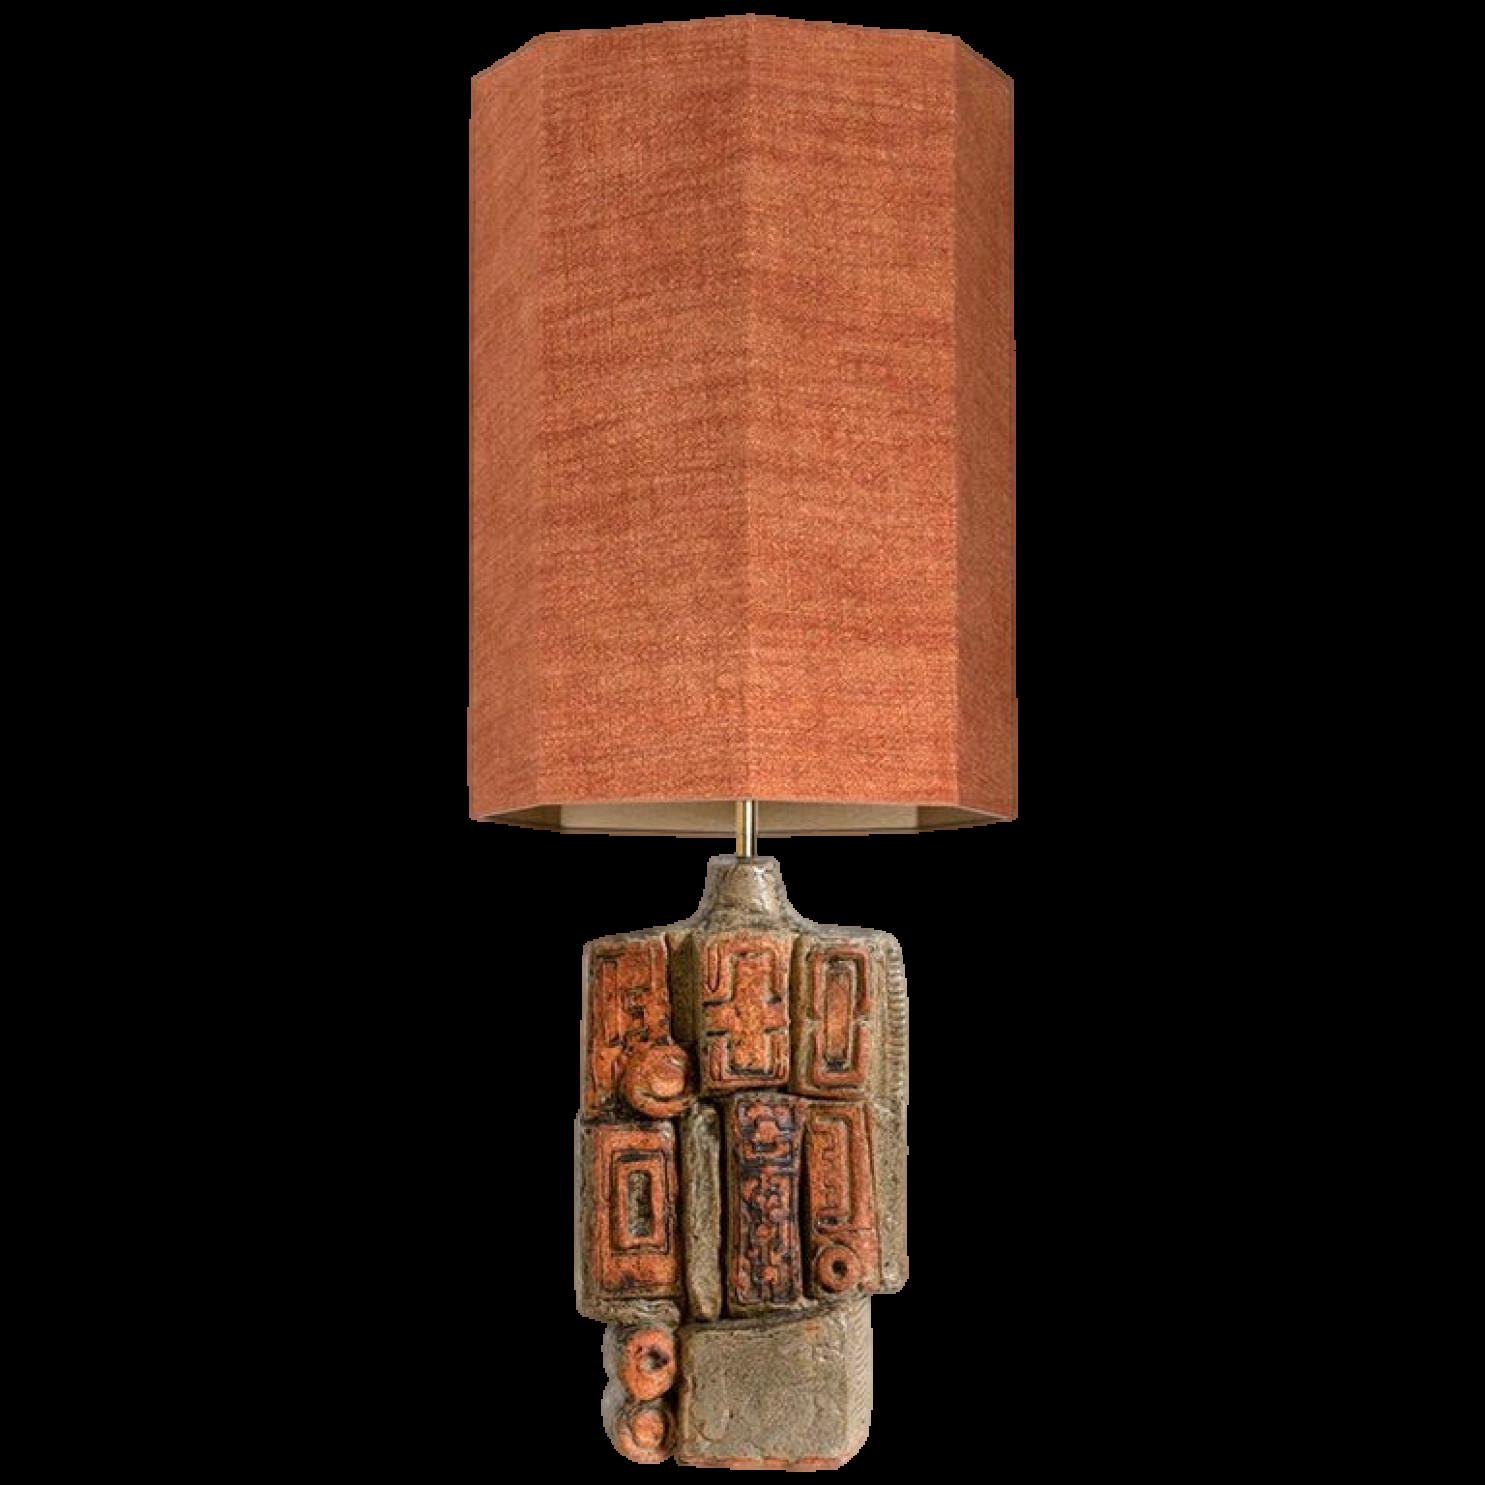 A rare table lamp by Bernard Rooke, England, 1960s. Sculptural high-end piece, made of handmade ceramic elements in natural tones of terracotta and stone. With a special custom made matching silk lamp Shade by René Houben. With warm bronze/gold